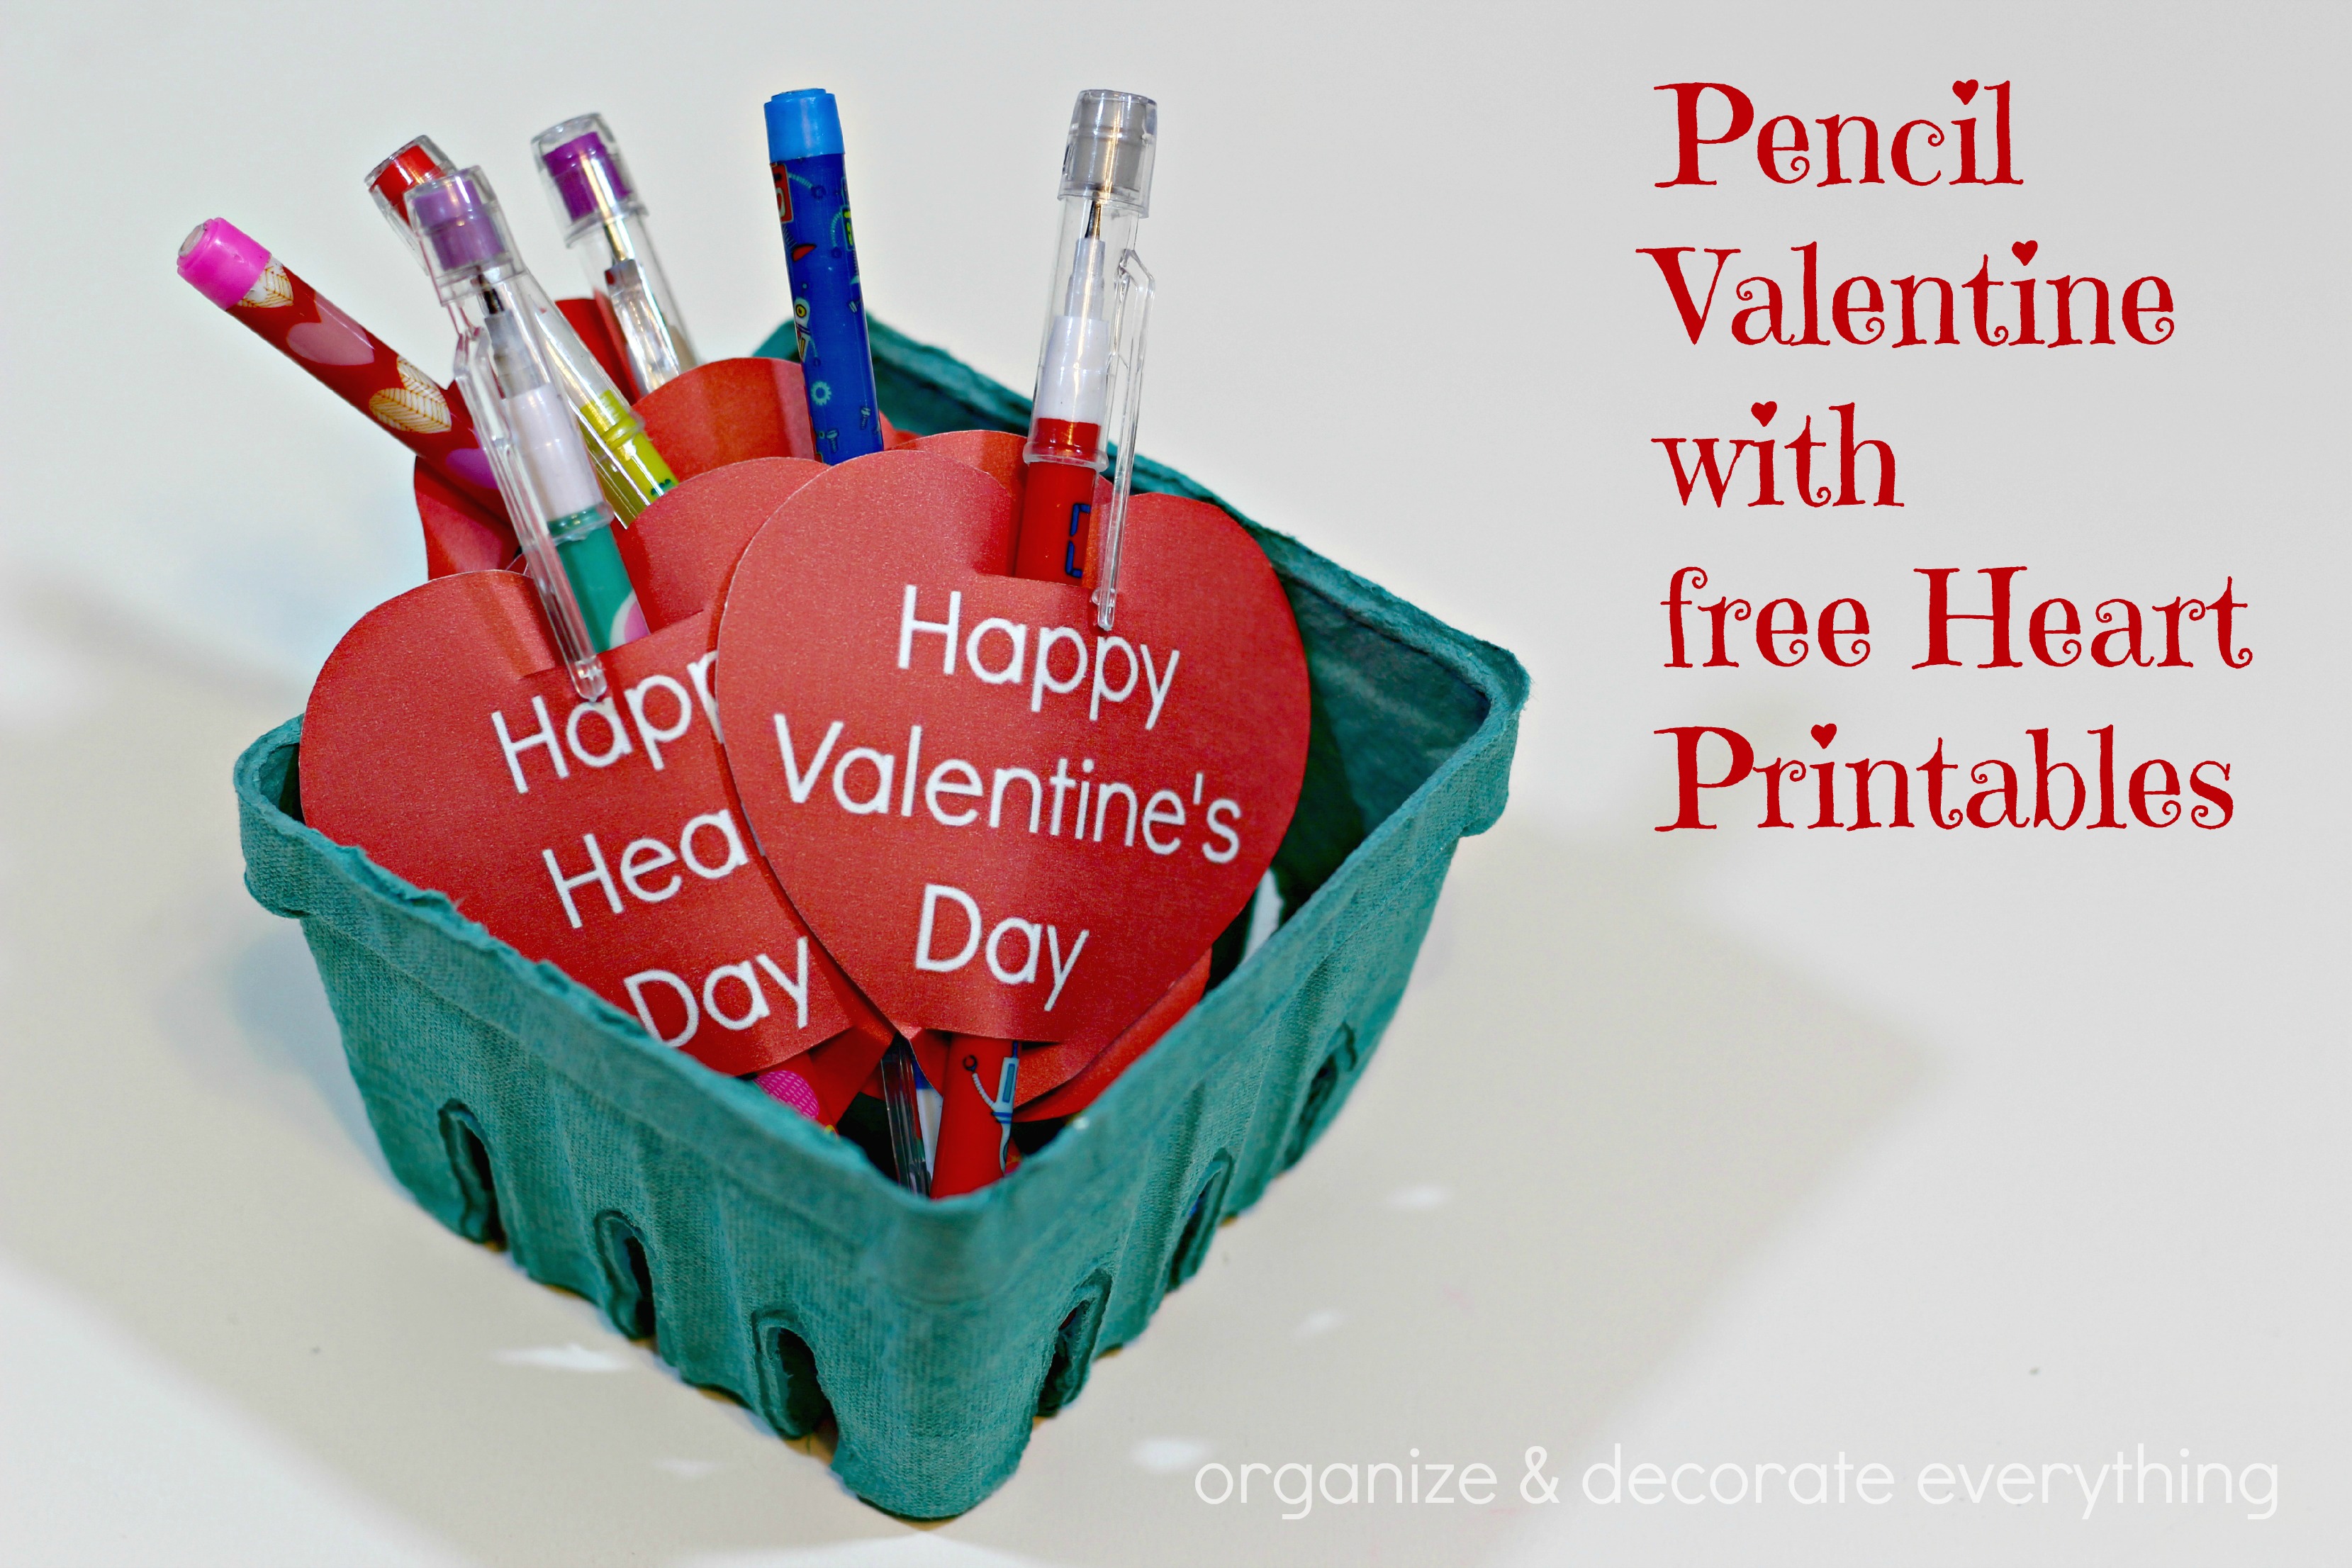 Pencil Valentine with free Heart Printables Organize and Decorate